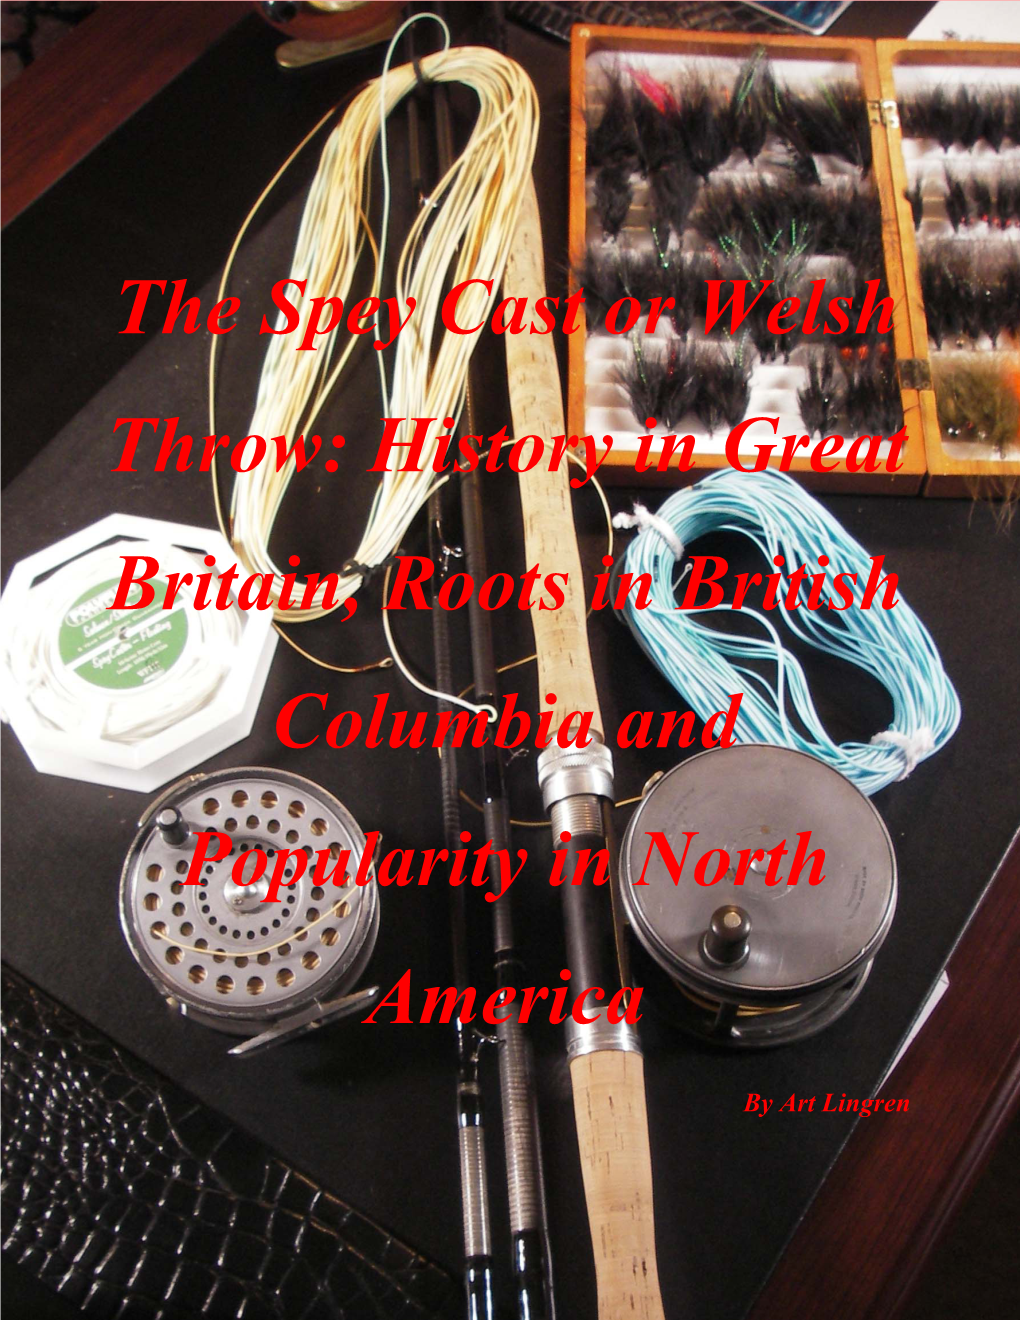 The Spey Cast Or Welsh Throw: History in Great Britain, Roots in British Columbia and Popularity in North America